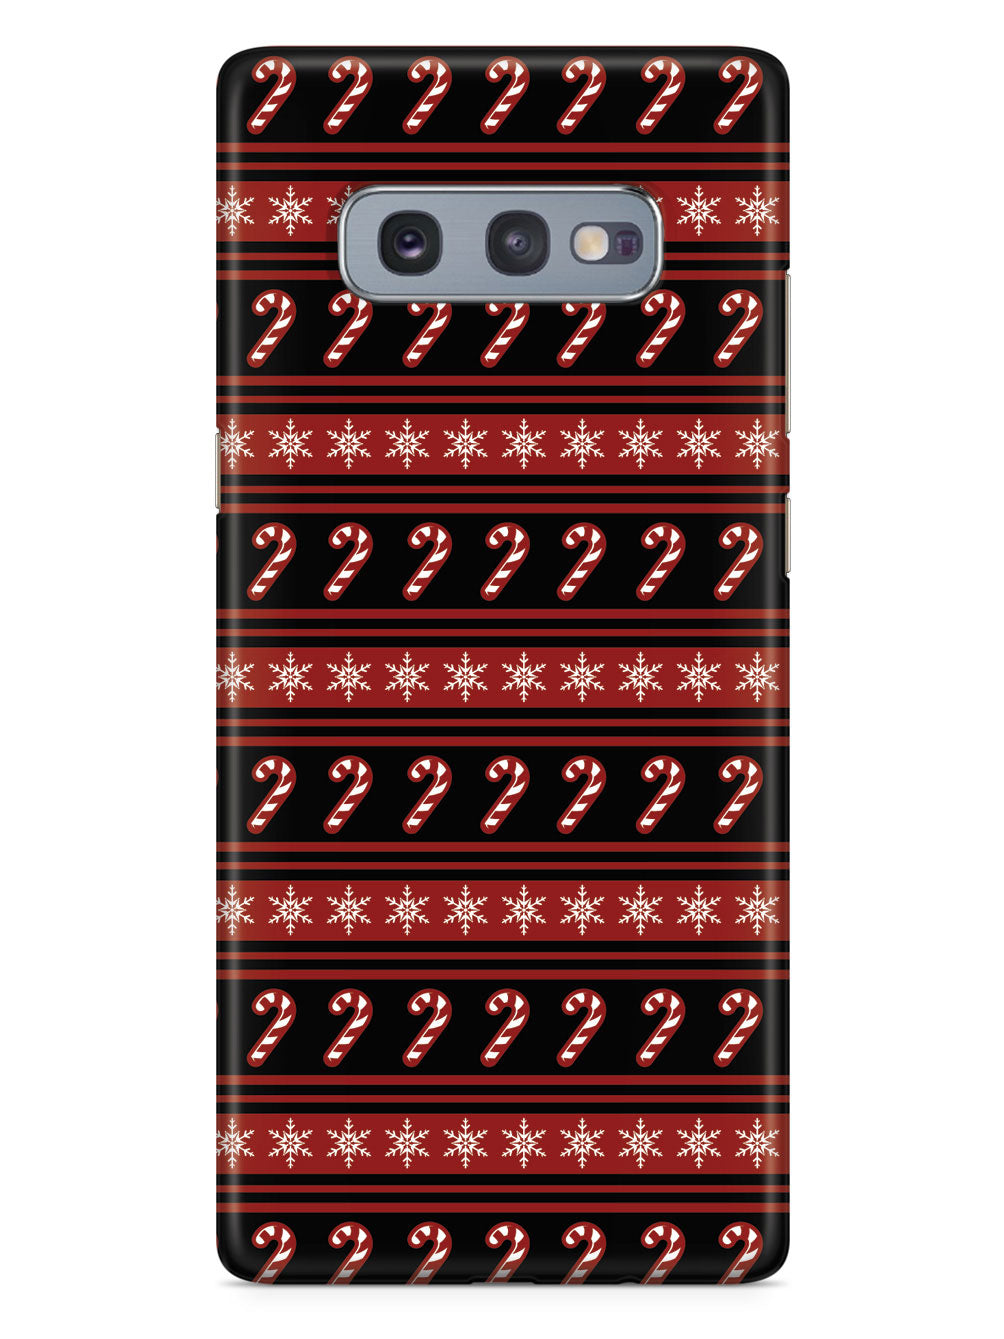 Candy Cane Snow Flakes Pattern - Black Case